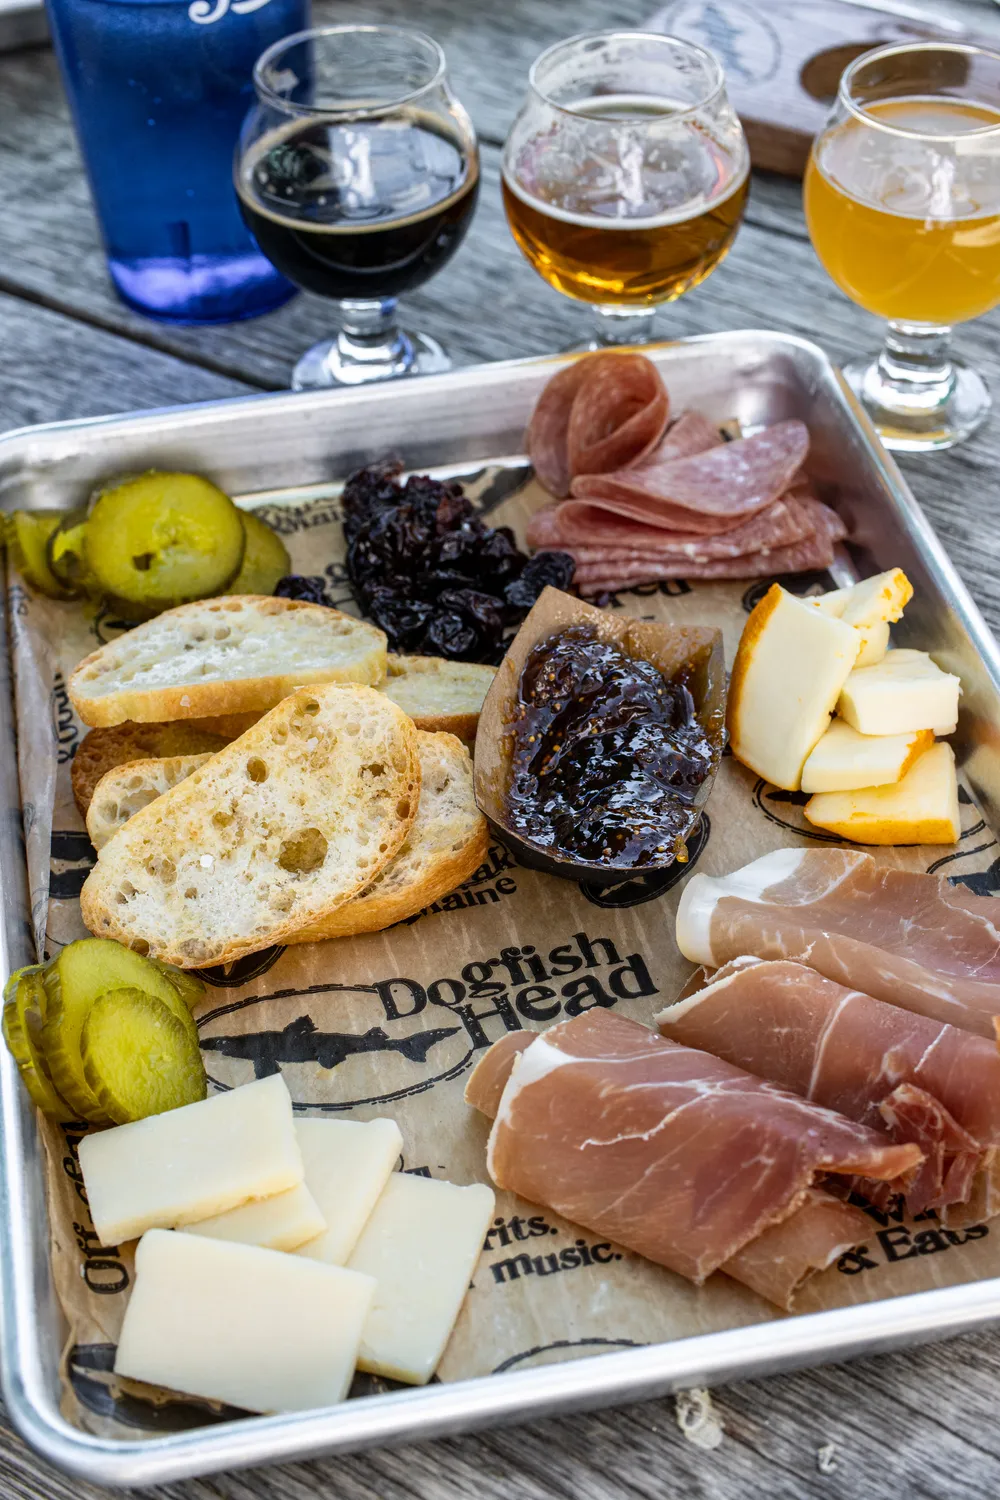 Enjoying charcuterie after our tour at Dogfish Head in Milton, DE. A plate of meats, cheeses, bread, and 3 tasting samples. 